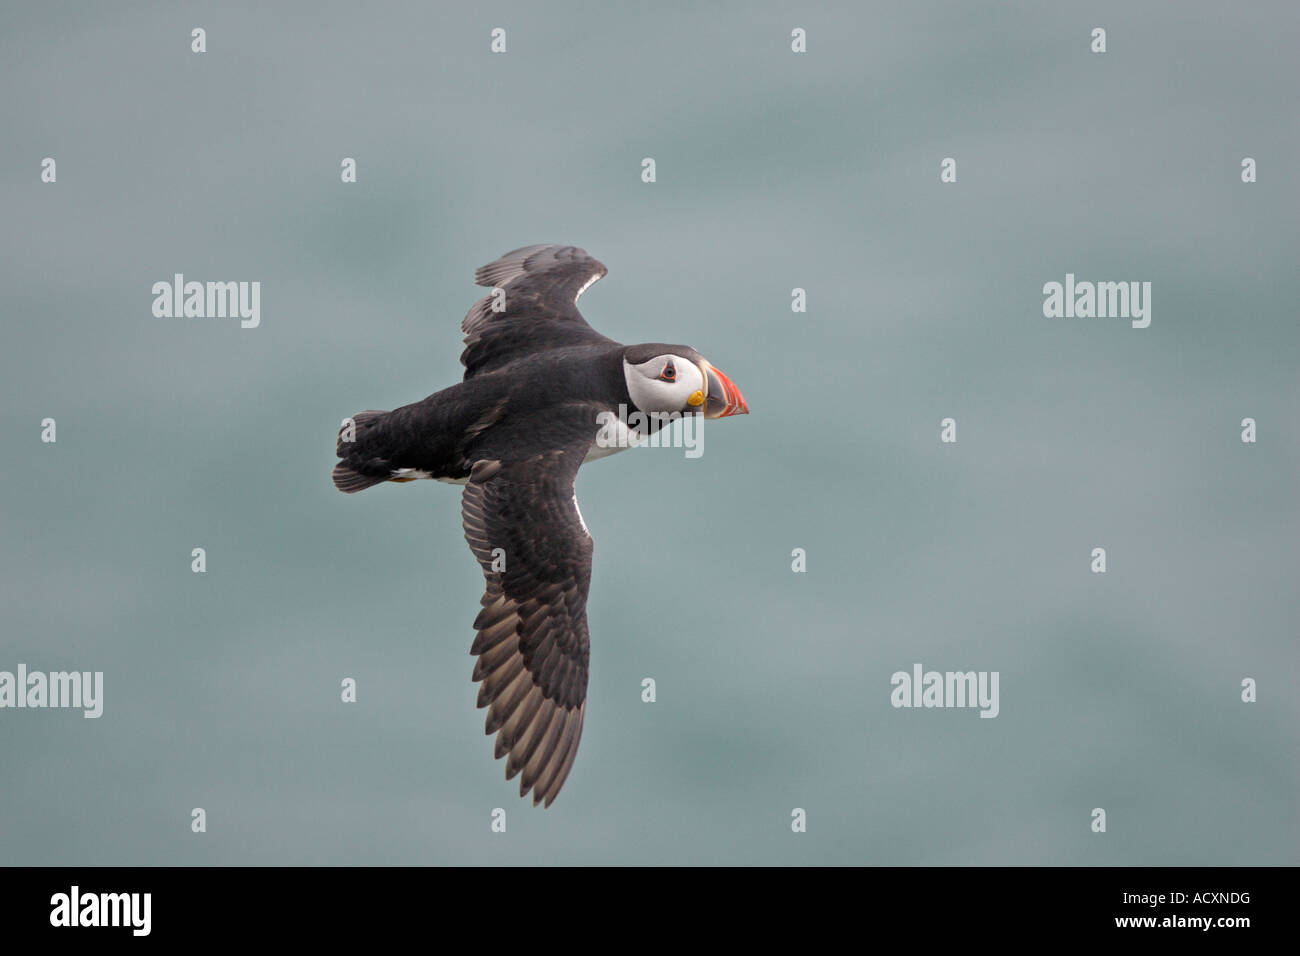 Puffin flying over sea Stock Photo